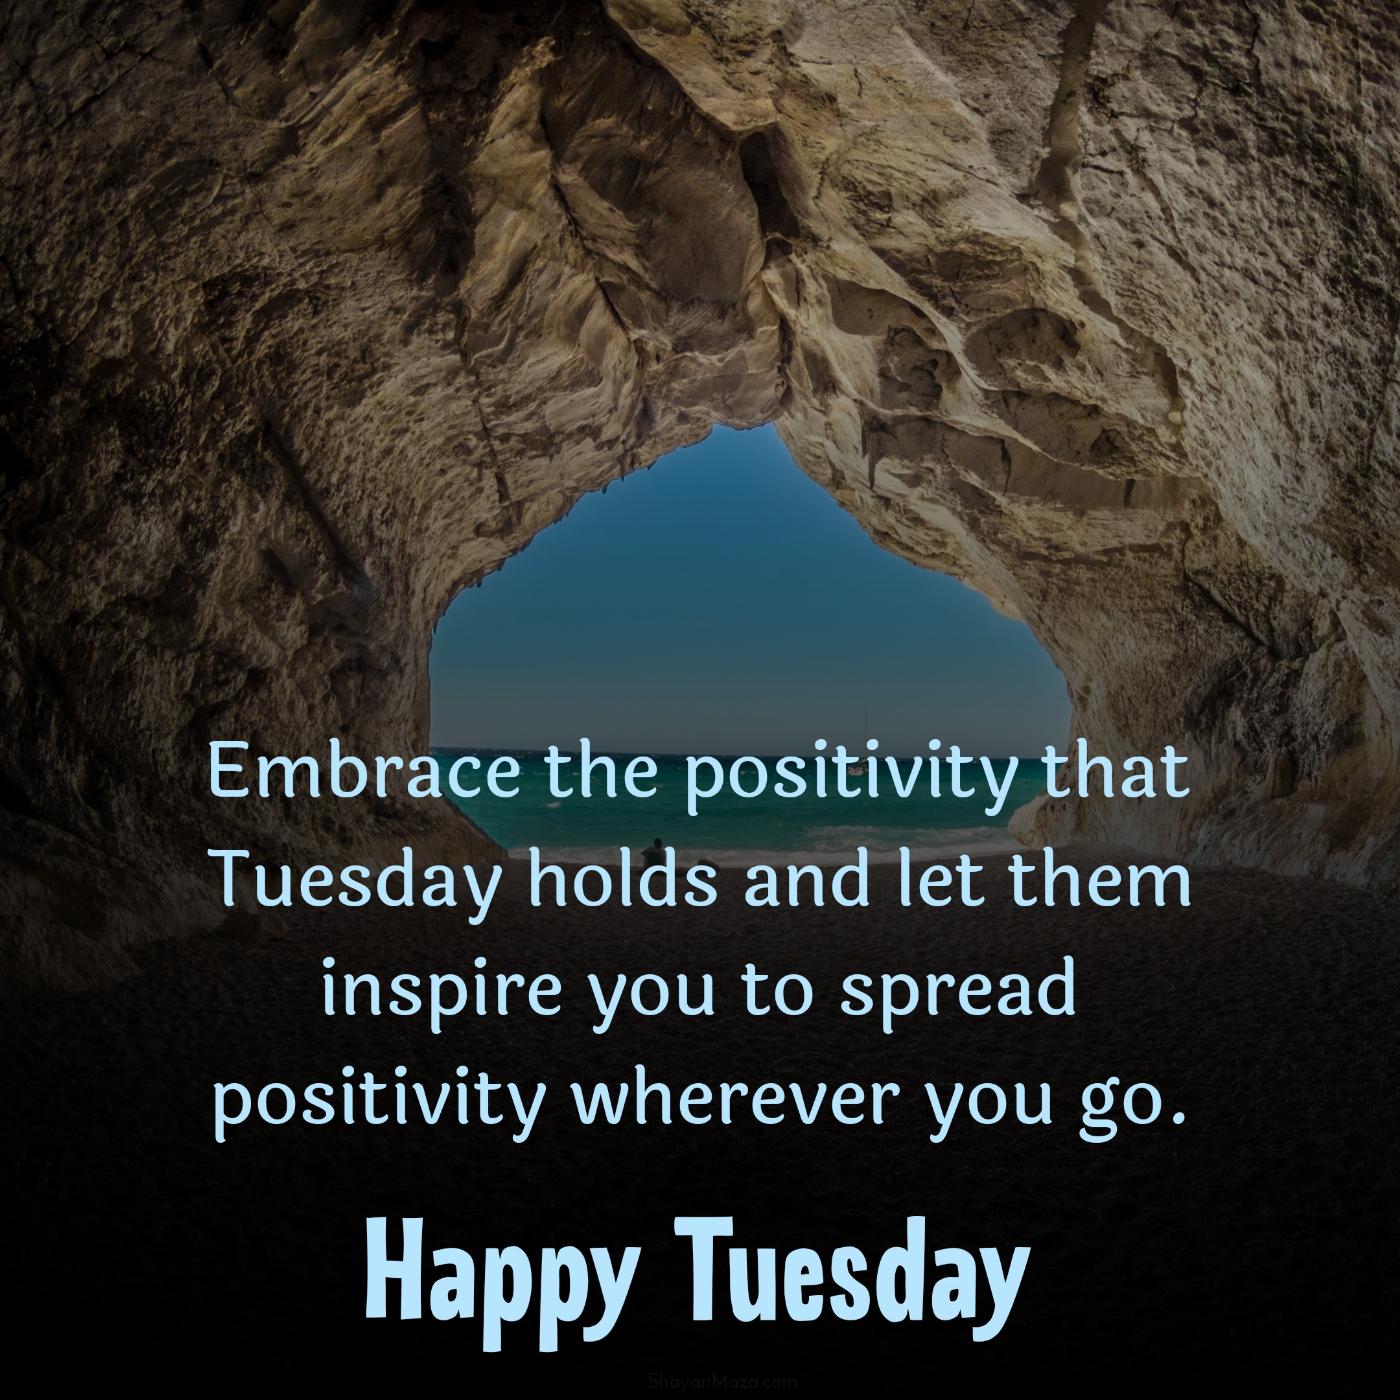 Embrace the positivity that Tuesday holds and let them inspire you